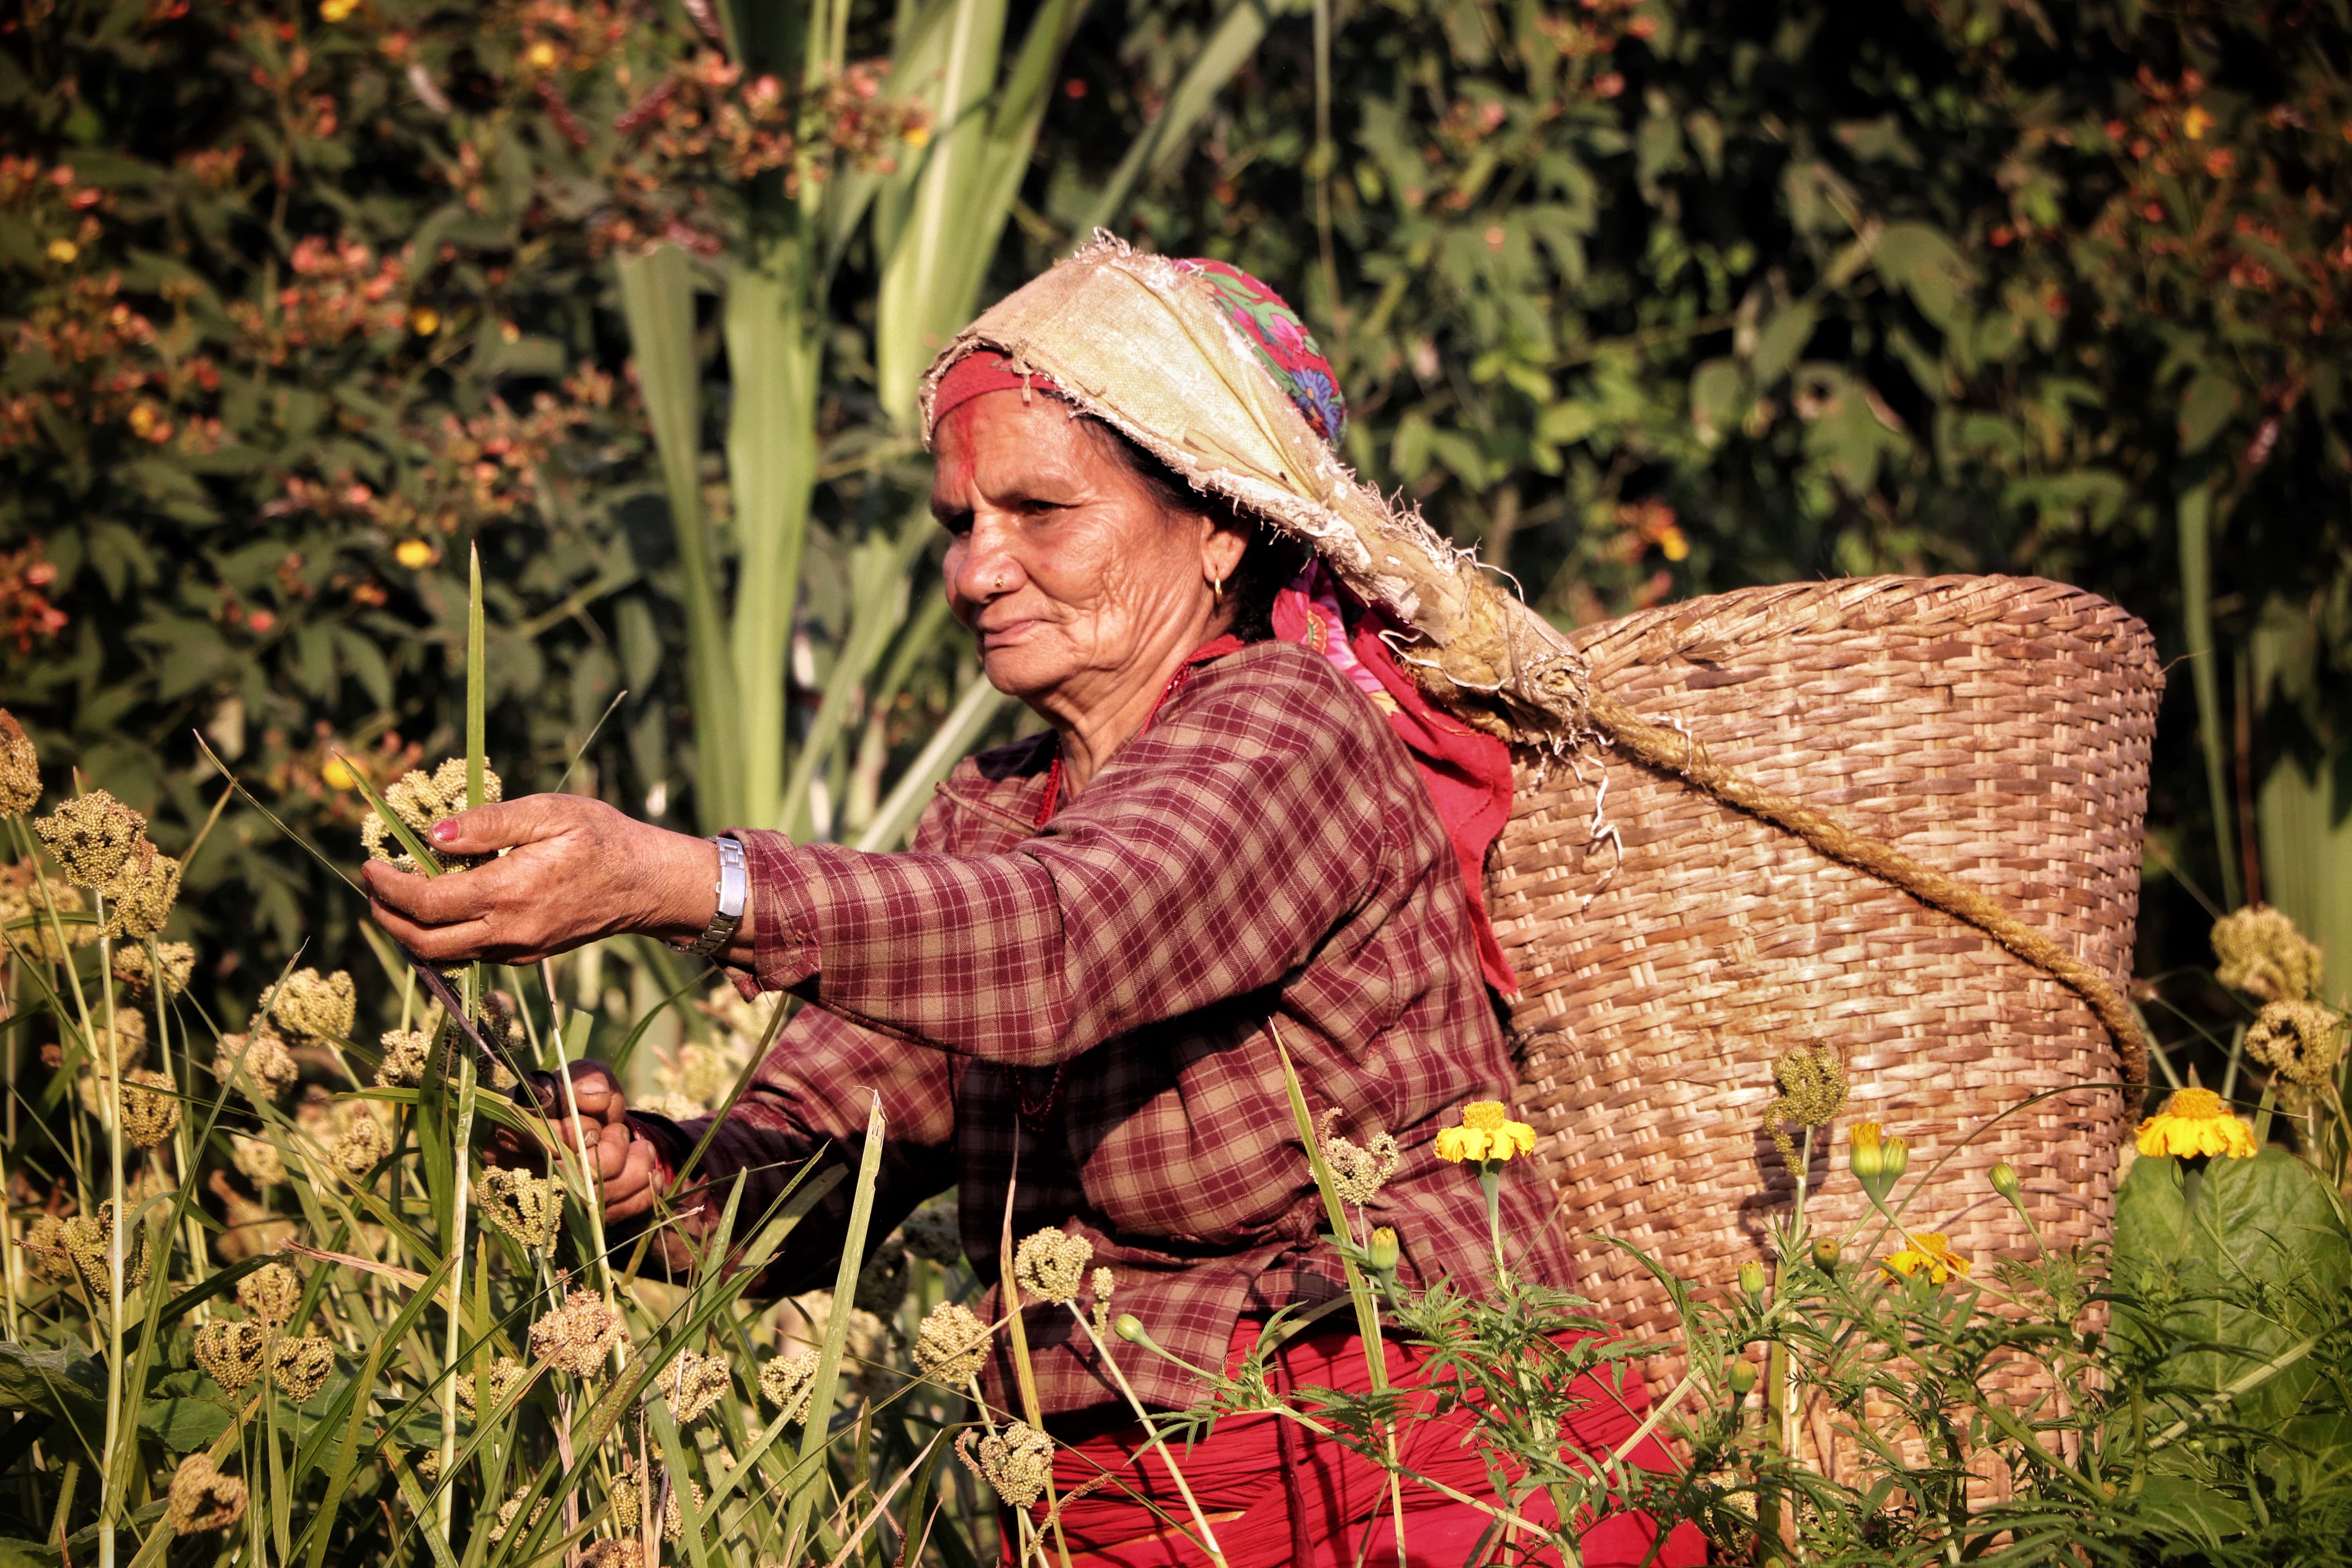 Role of women in millets conservation